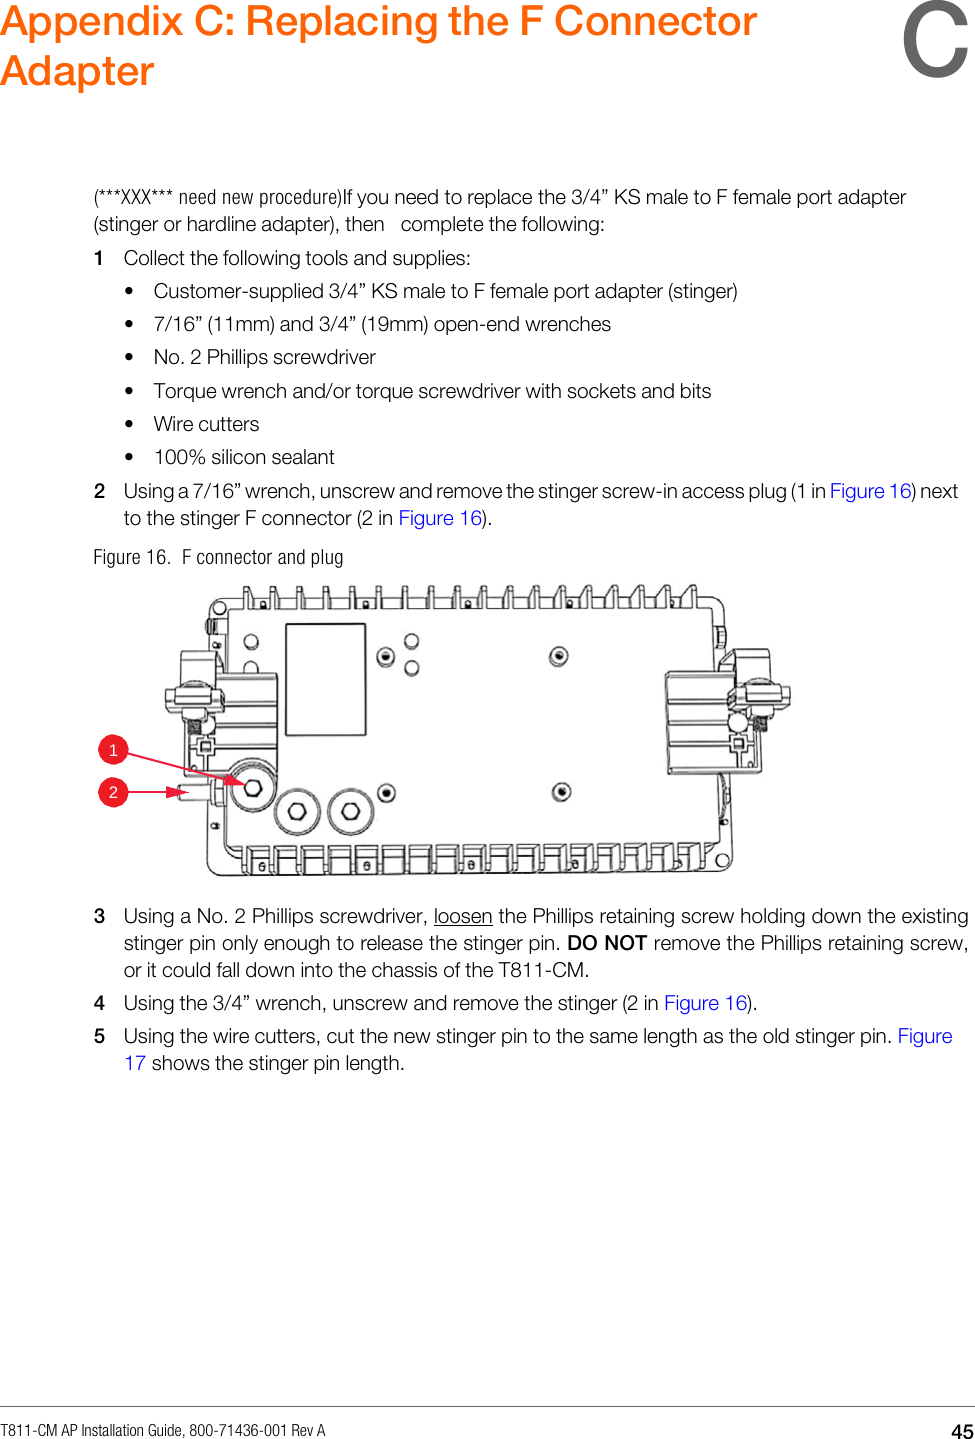 T811-CM AP Installation Guide, 800-71436-001 Rev A  45   Appendix C: Replacing the F Connector Adapter    (***XXX*** need new procedure)If you need to replace the 3/4” KS male to F female port adapter (stinger or hardline adapter), then complete the following: 1 Collect the following tools and supplies: • Customer-supplied 3/4” KS male to F female port adapter (stinger) • 7/16” (11mm) and 3/4” (19mm) open-end wrenches • No. 2 Phillips screwdriver • Torque wrench and/or torque screwdriver with sockets and bits • Wire cutters • 100% silicon sealant 2 Using a 7/16” wrench, unscrew and remove the stinger screw-in access plug (1 in Figure 16) next to the stinger F connector (2 in Figure 16). Figure 16.  F connector and plug    3 Using a No. 2 Phillips screwdriver, loosen the Phillips retaining screw holding down the existing stinger pin only enough to release the stinger pin. DO NOT remove the Phillips retaining screw, or it could fall down into the chassis of the T811-CM. 4 Using the 3/4” wrench, unscrew and remove the stinger (2 in Figure 16). 5 Using the wire cutters, cut the new stinger pin to the same length as the old stinger pin. Figure 17 shows the stinger pin length. 1  2 C 